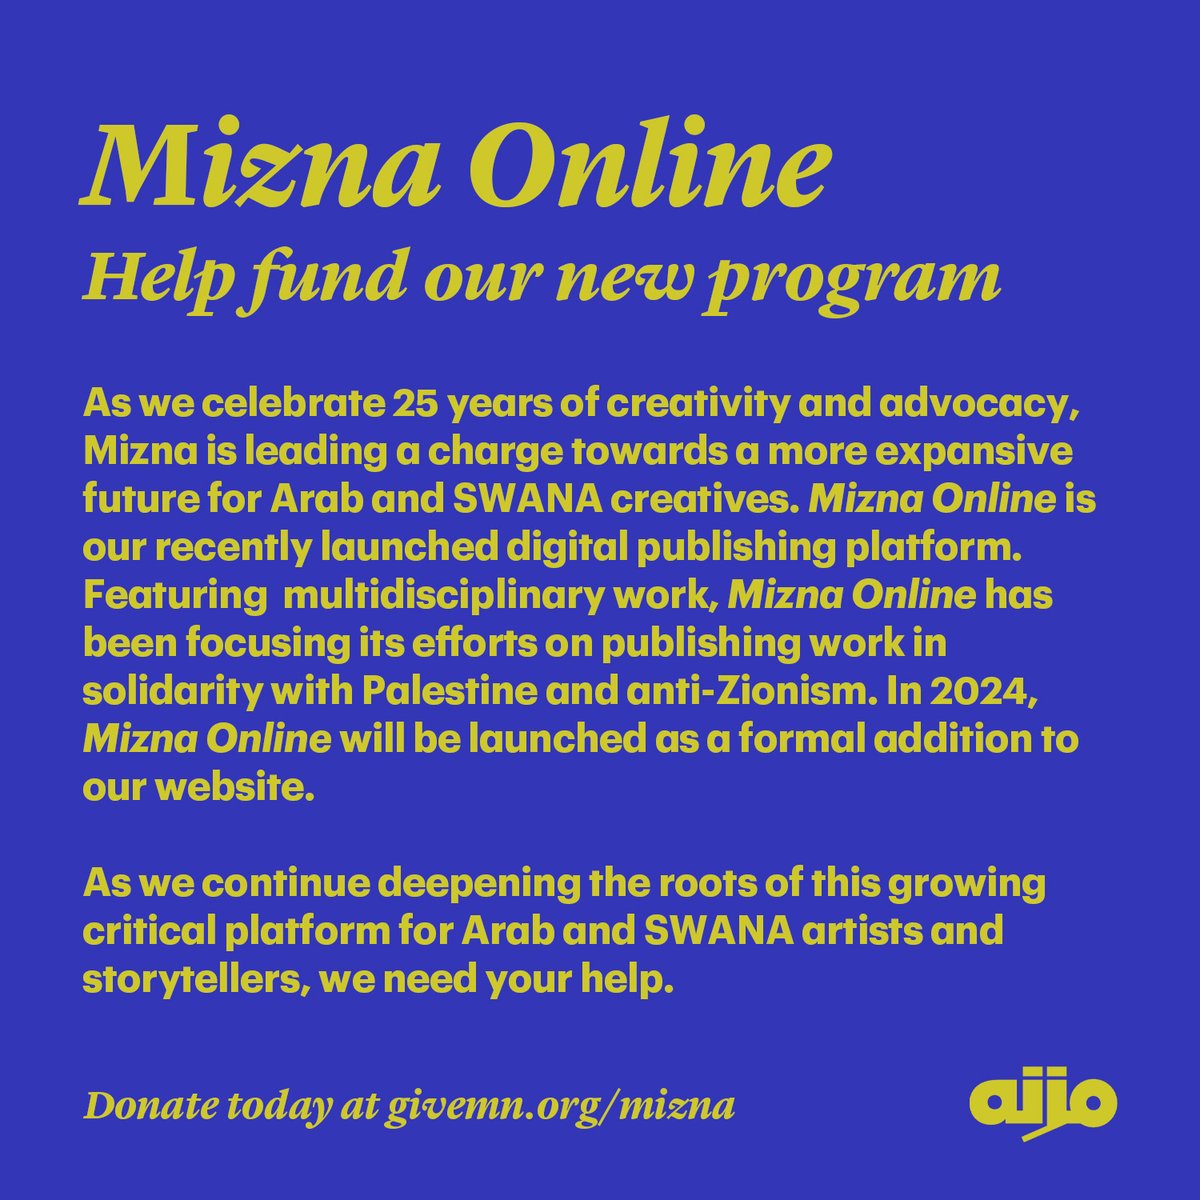 Help fund our new program: Mizna Online We're in the process of launching a new digital platform for multidisciplinary work. We are $8,000 away from reaching our goal. Join us in building this critical platform! Give now at givemn.org/mizna